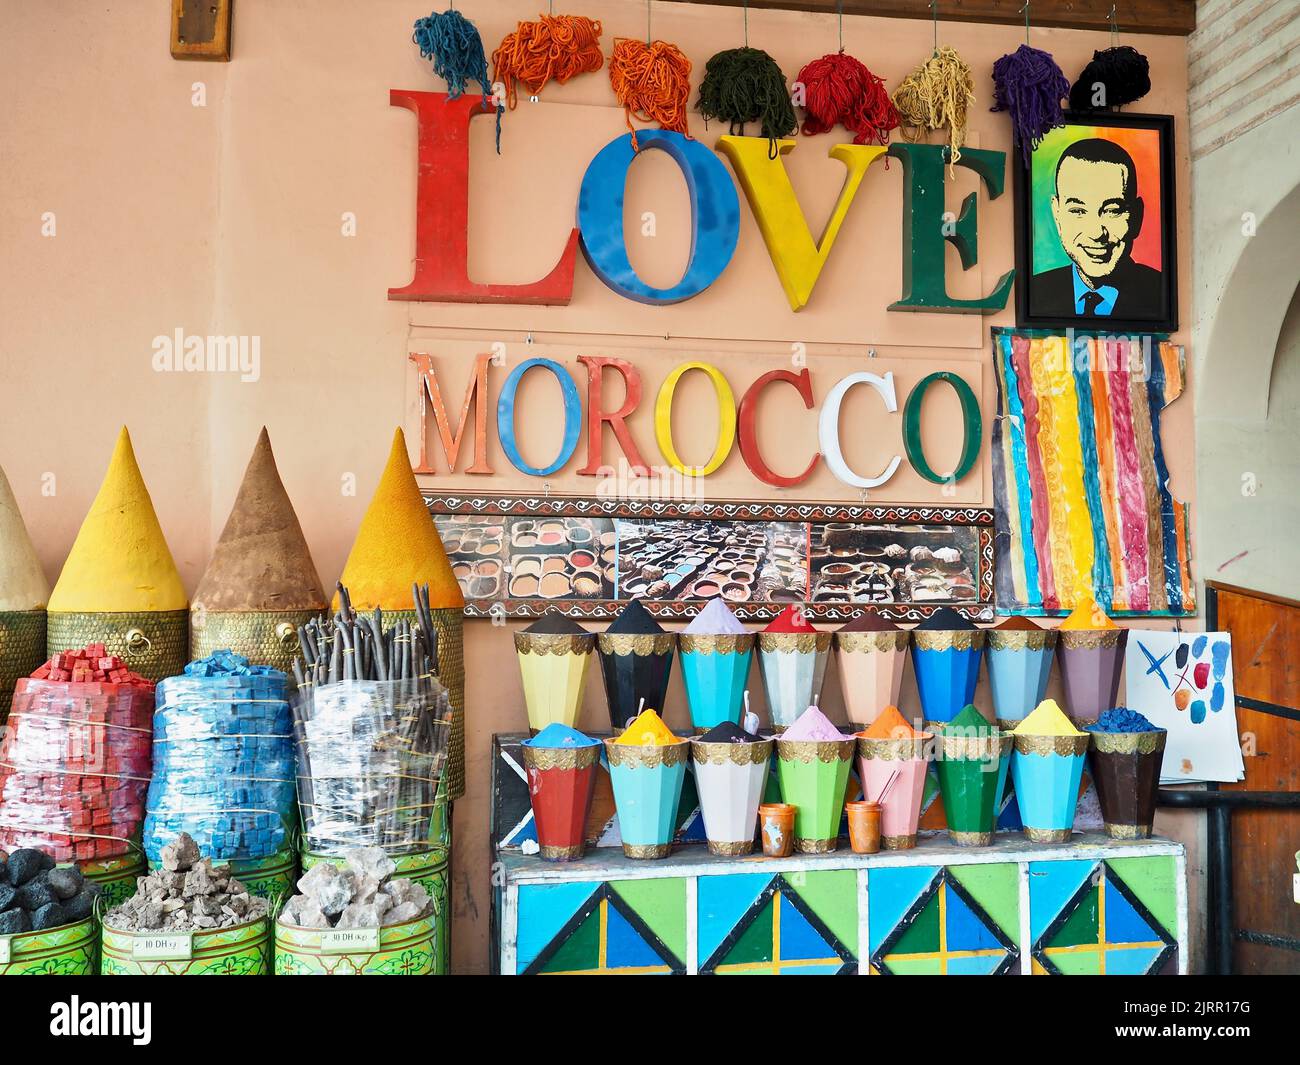 A colorful spice shop in Marrakesh, with a king picture hanging on the wall Stock Photo